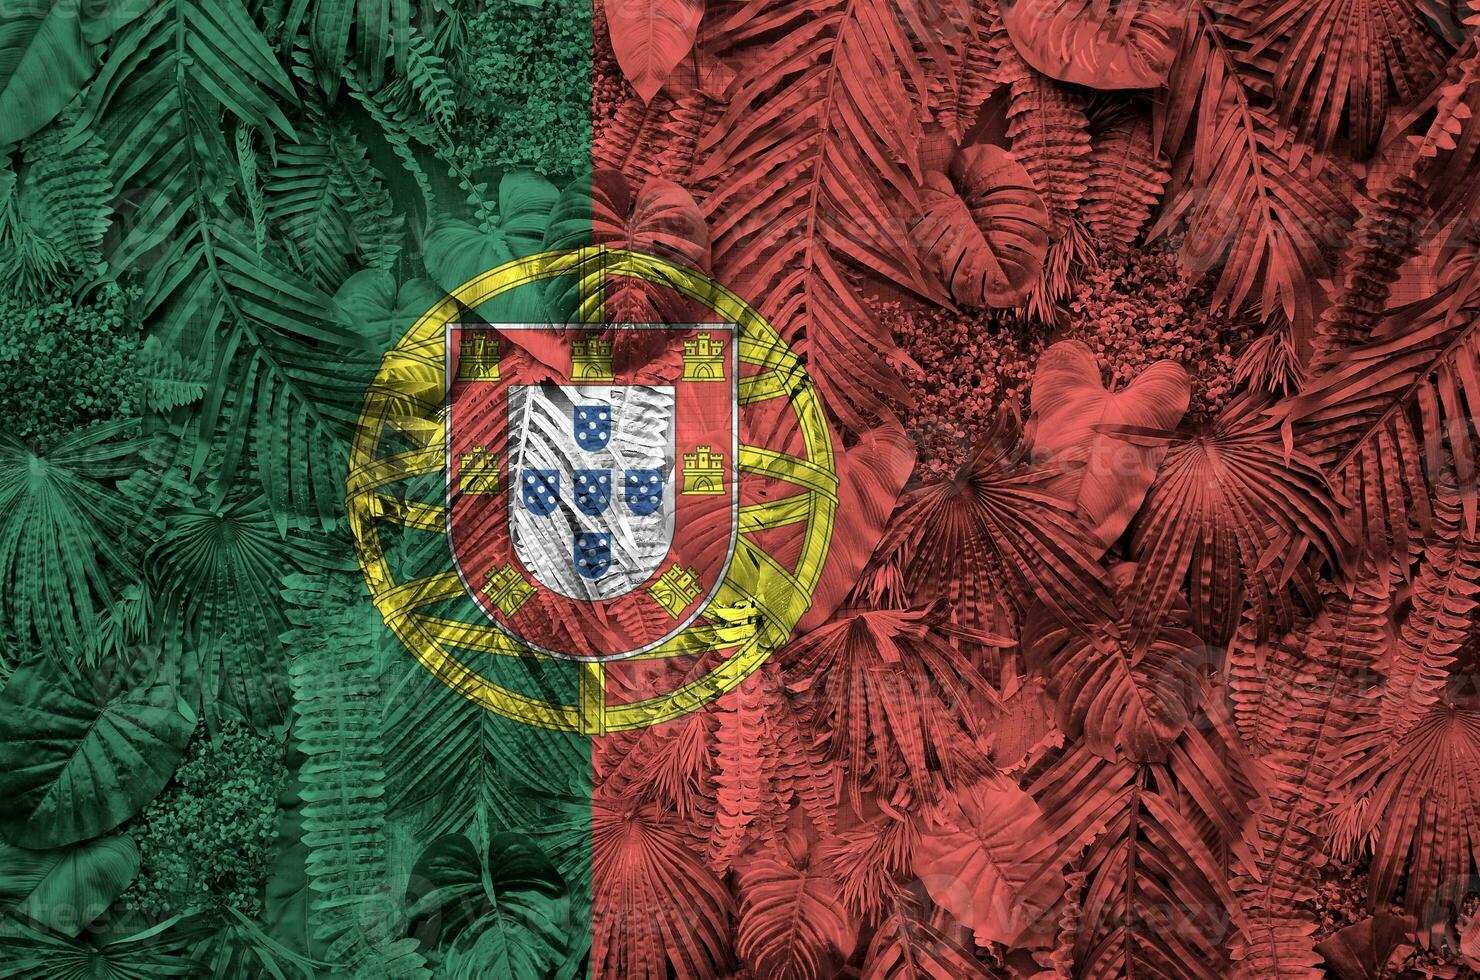 Portugal flag depicted on many leafs of monstera palm trees. Trendy fashionable backdrop photo